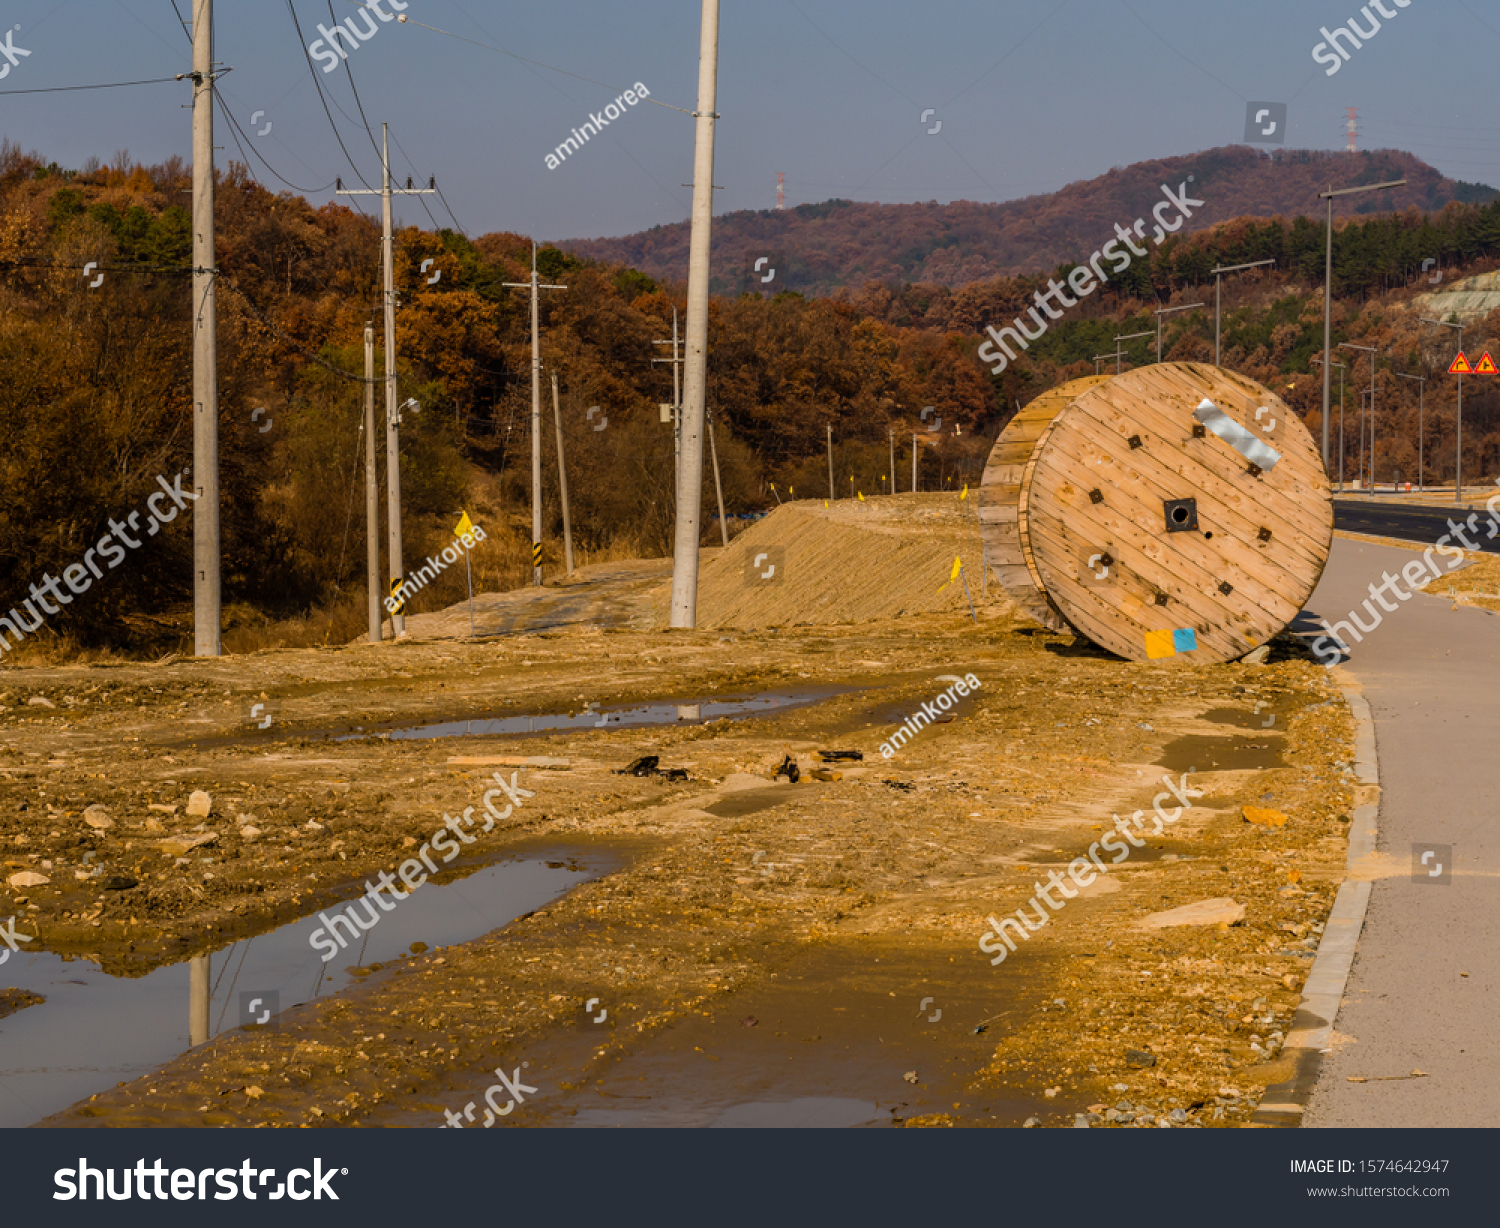 Large wooden industrial spools sitting on ground next to sidewalk of paved road. #1574642947